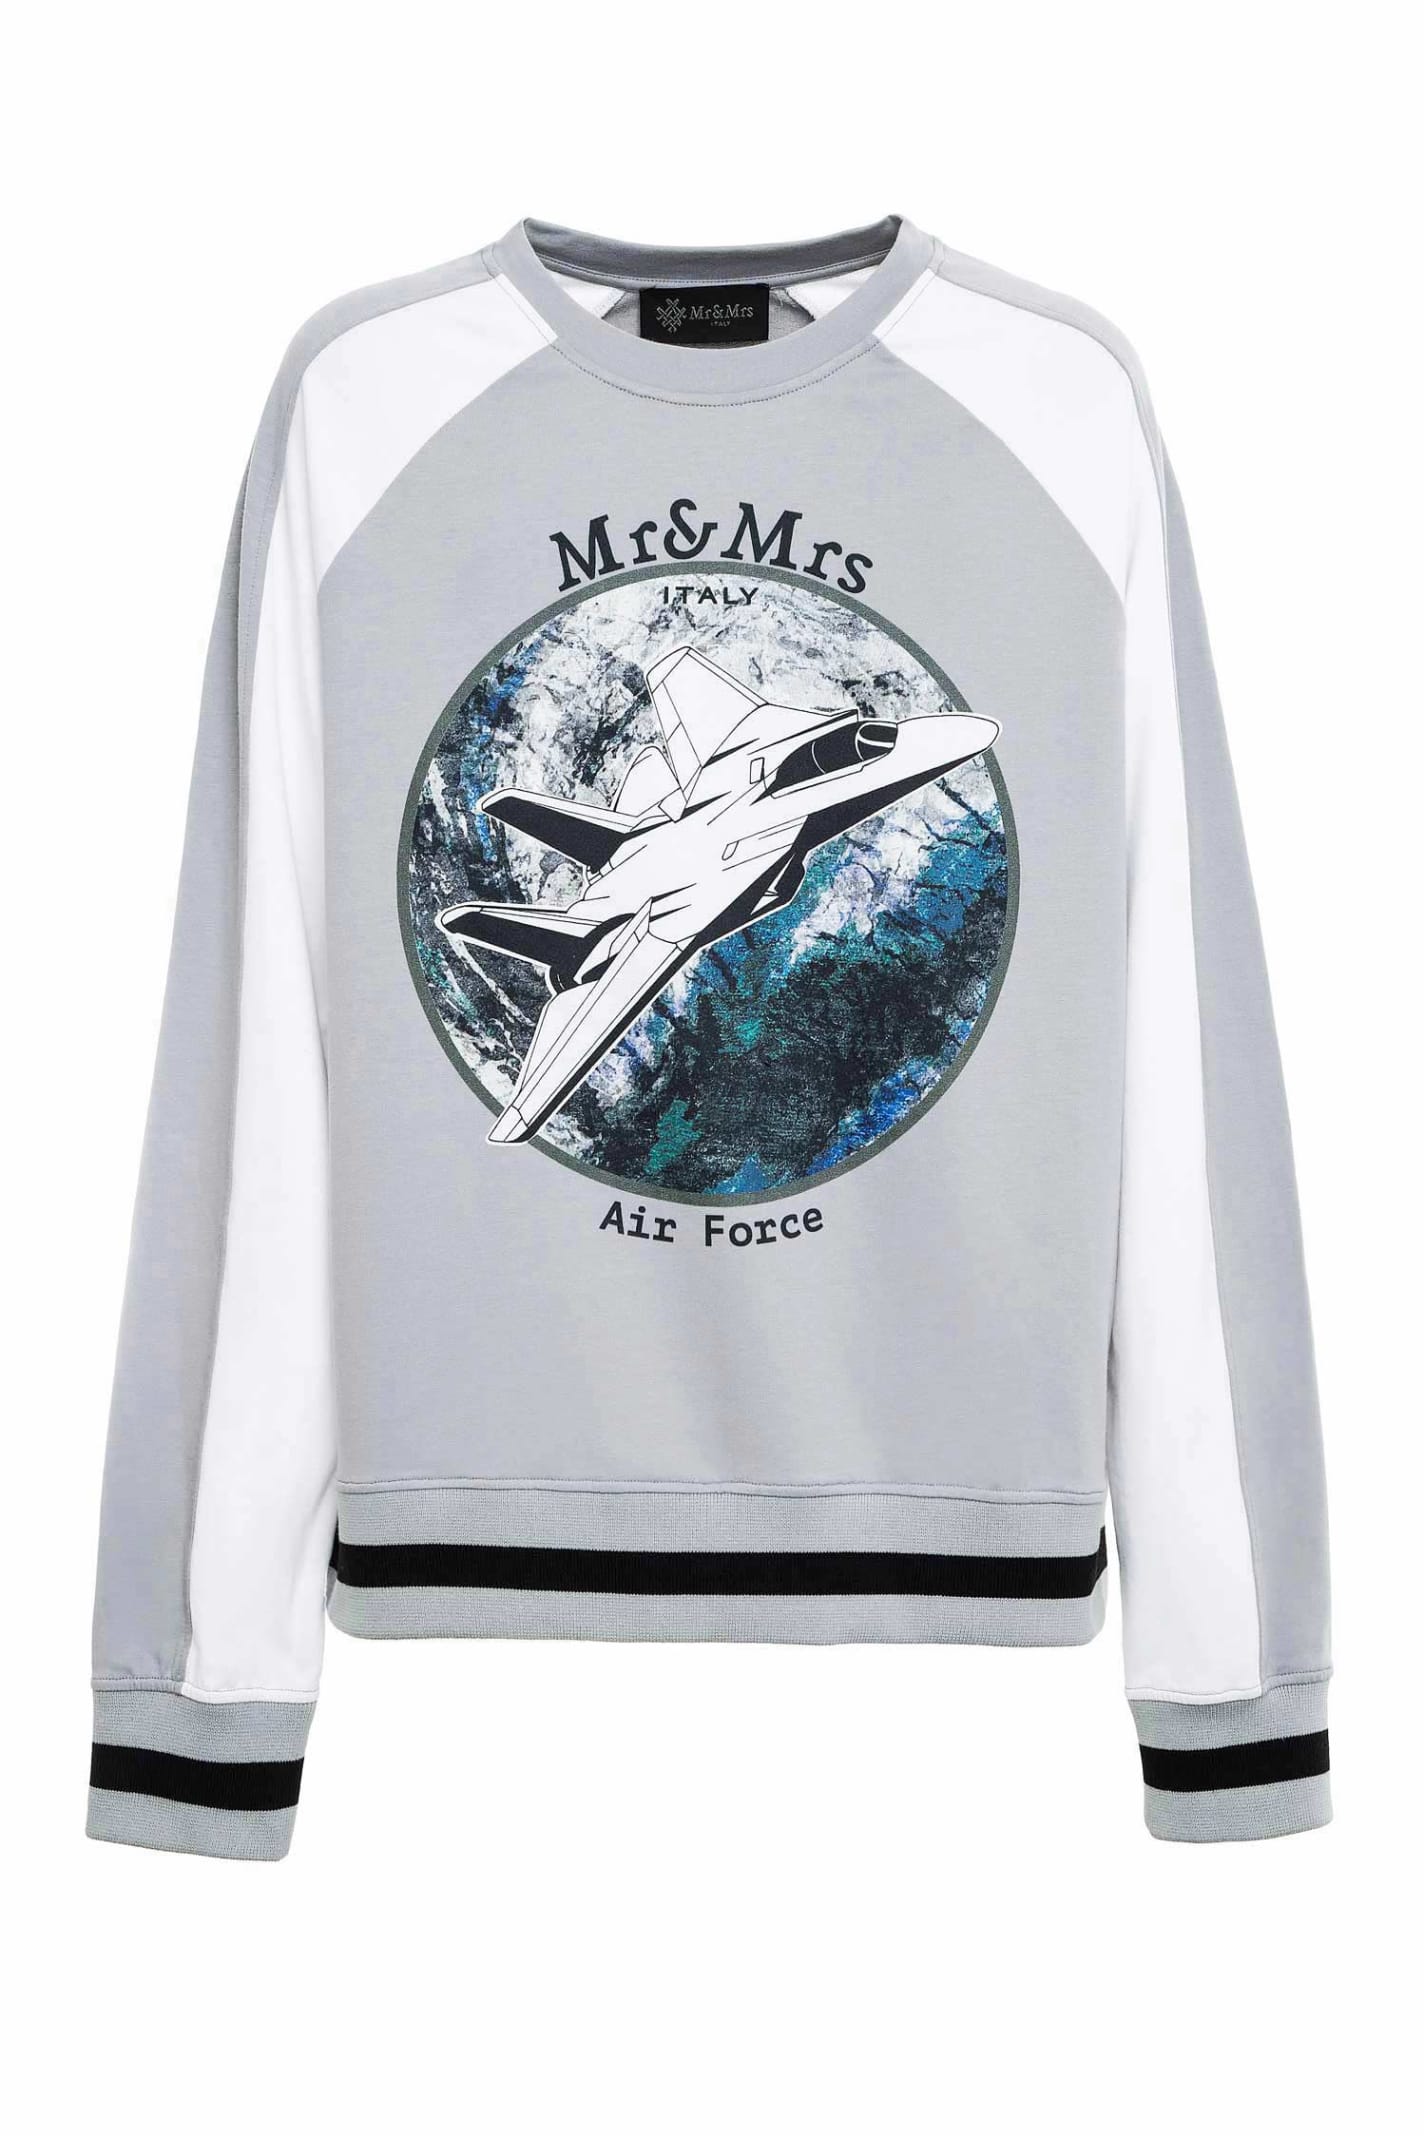 Mr & Mrs Italy Space-inspired Sweatshirt For Man